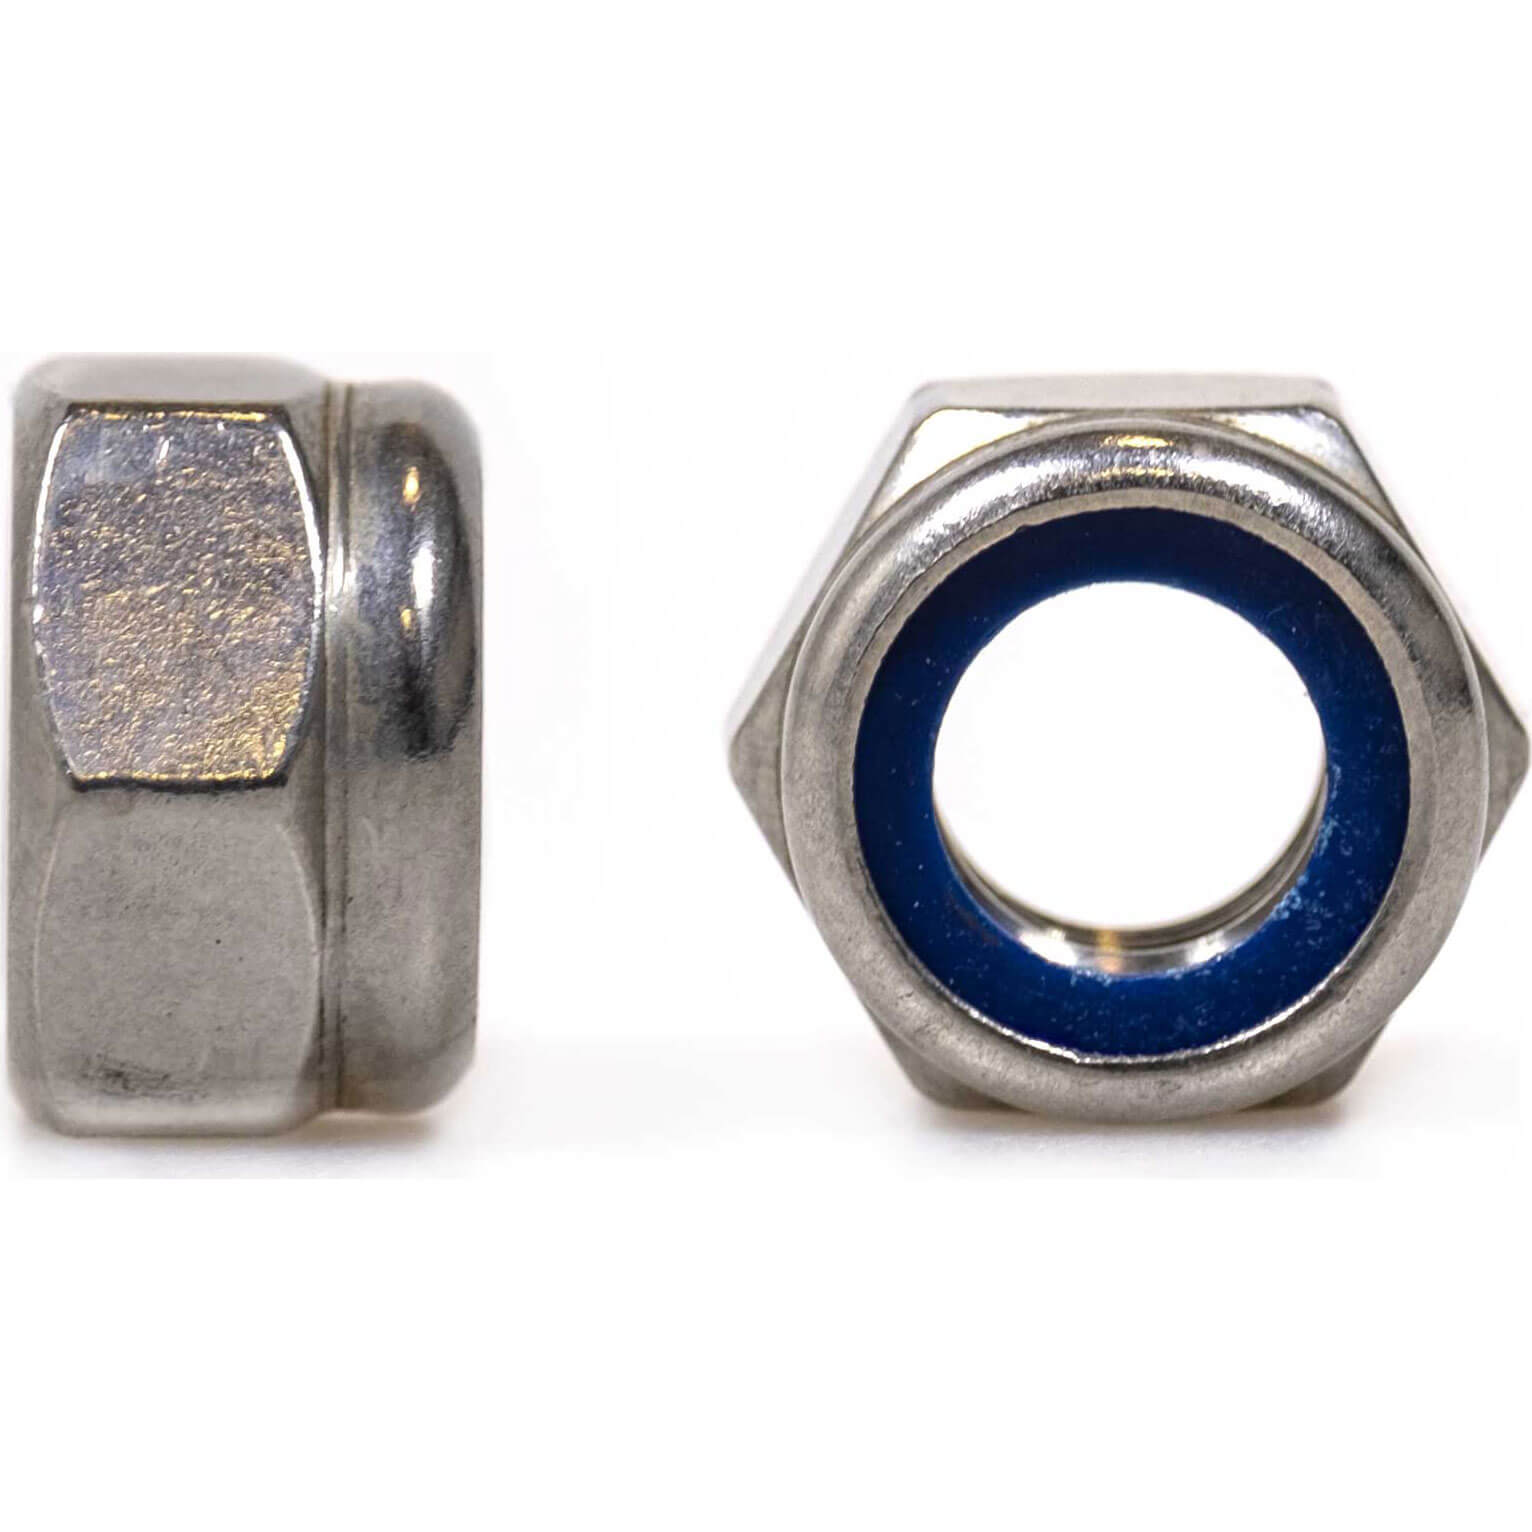 Image of Sirius A2 304 Stainless Steel Hexagon Lock Nuts M10